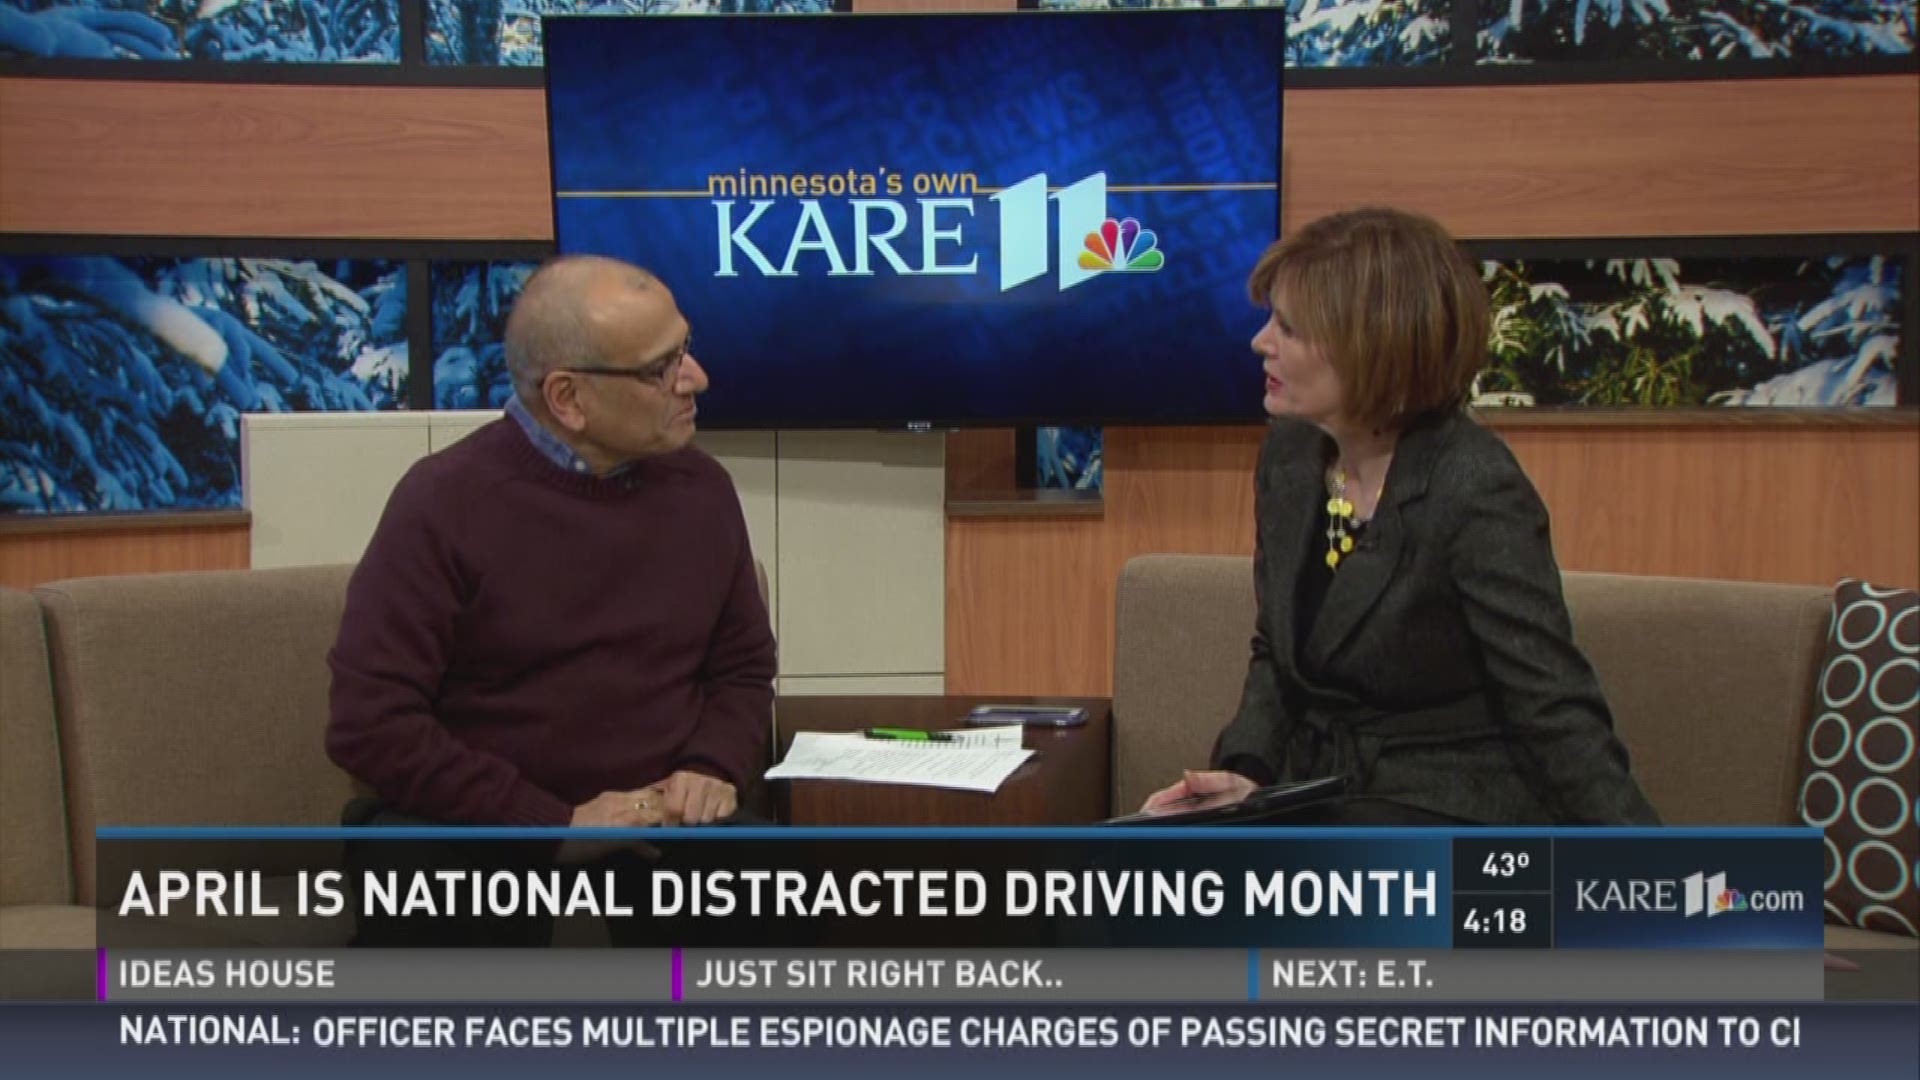 April is National Distracted Driving Month